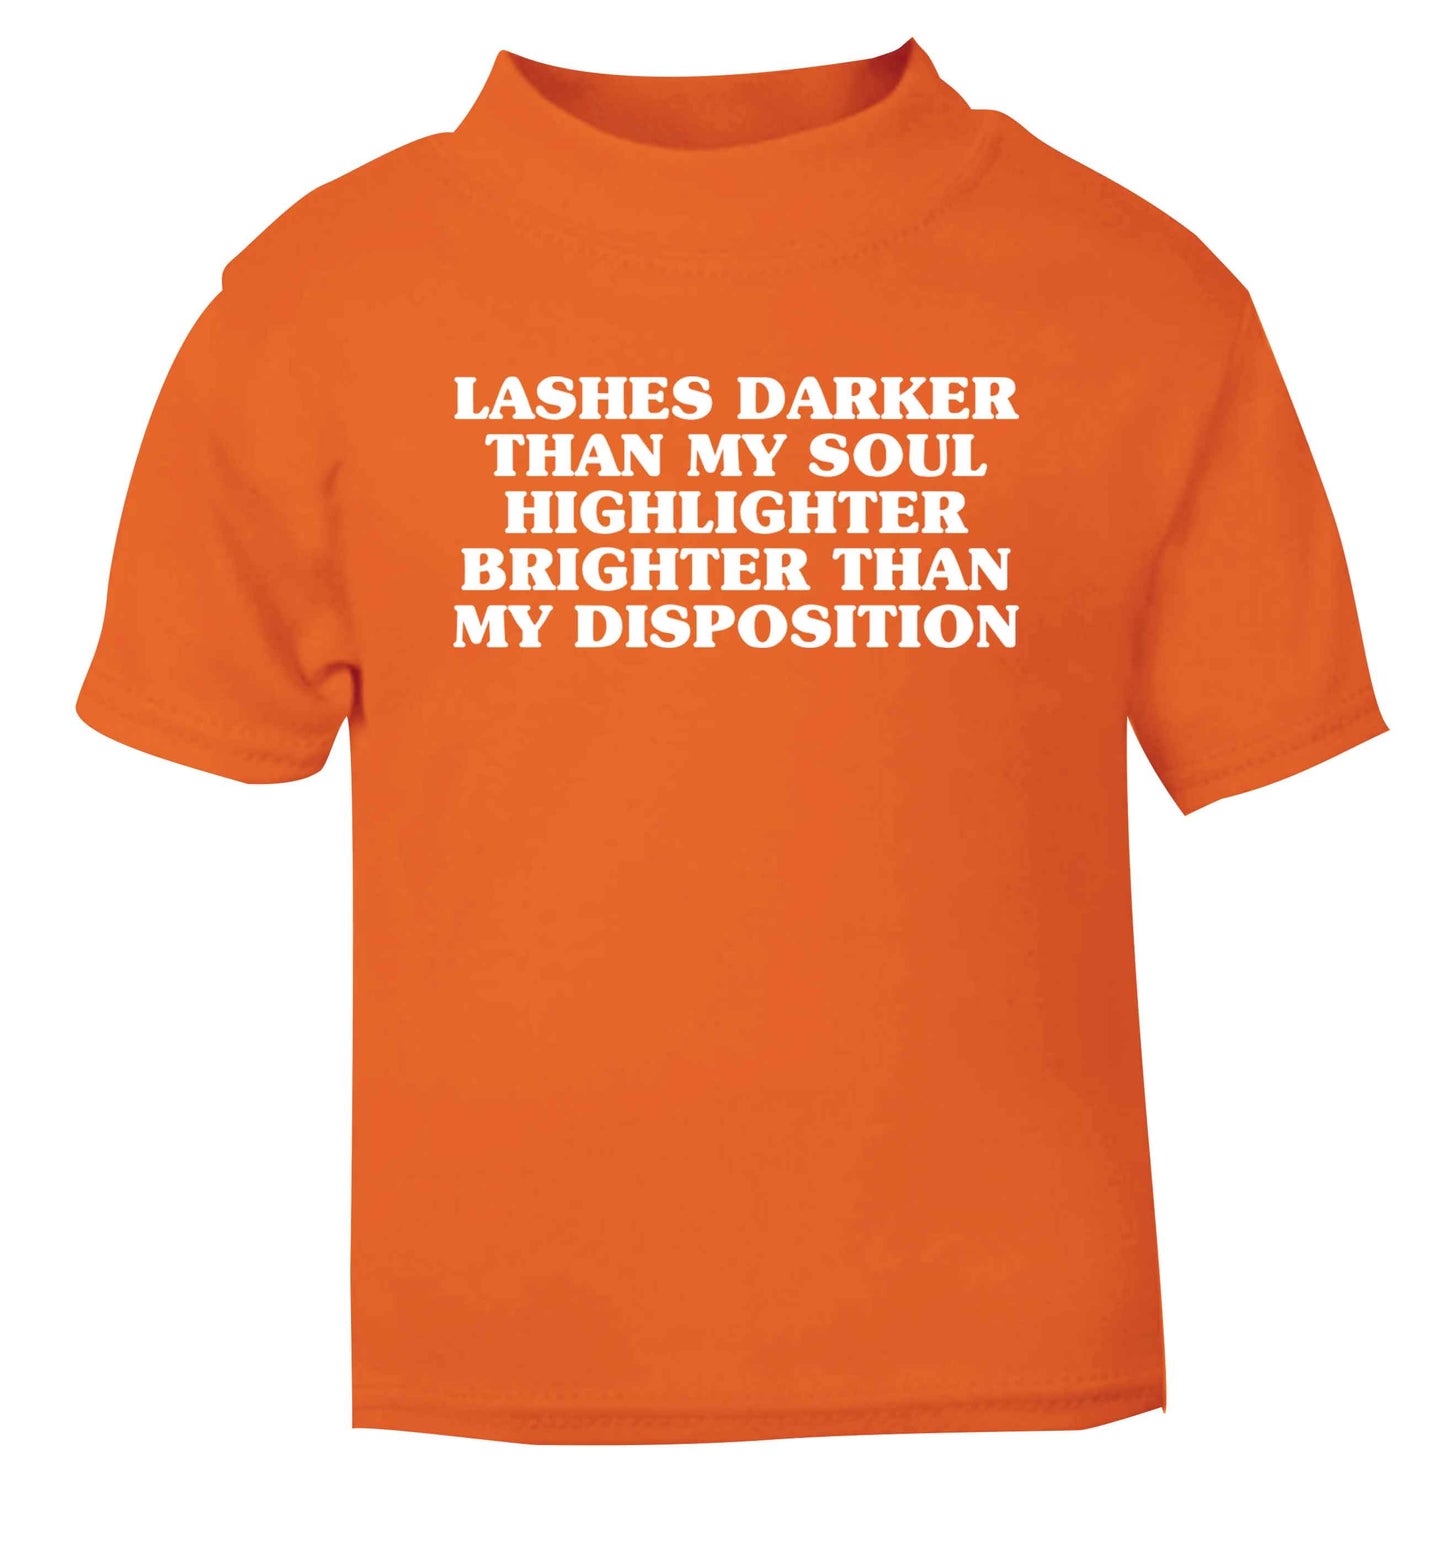 Lashes darker than my soul, highlighter brighter than my disposition orange Baby Toddler Tshirt 2 Years